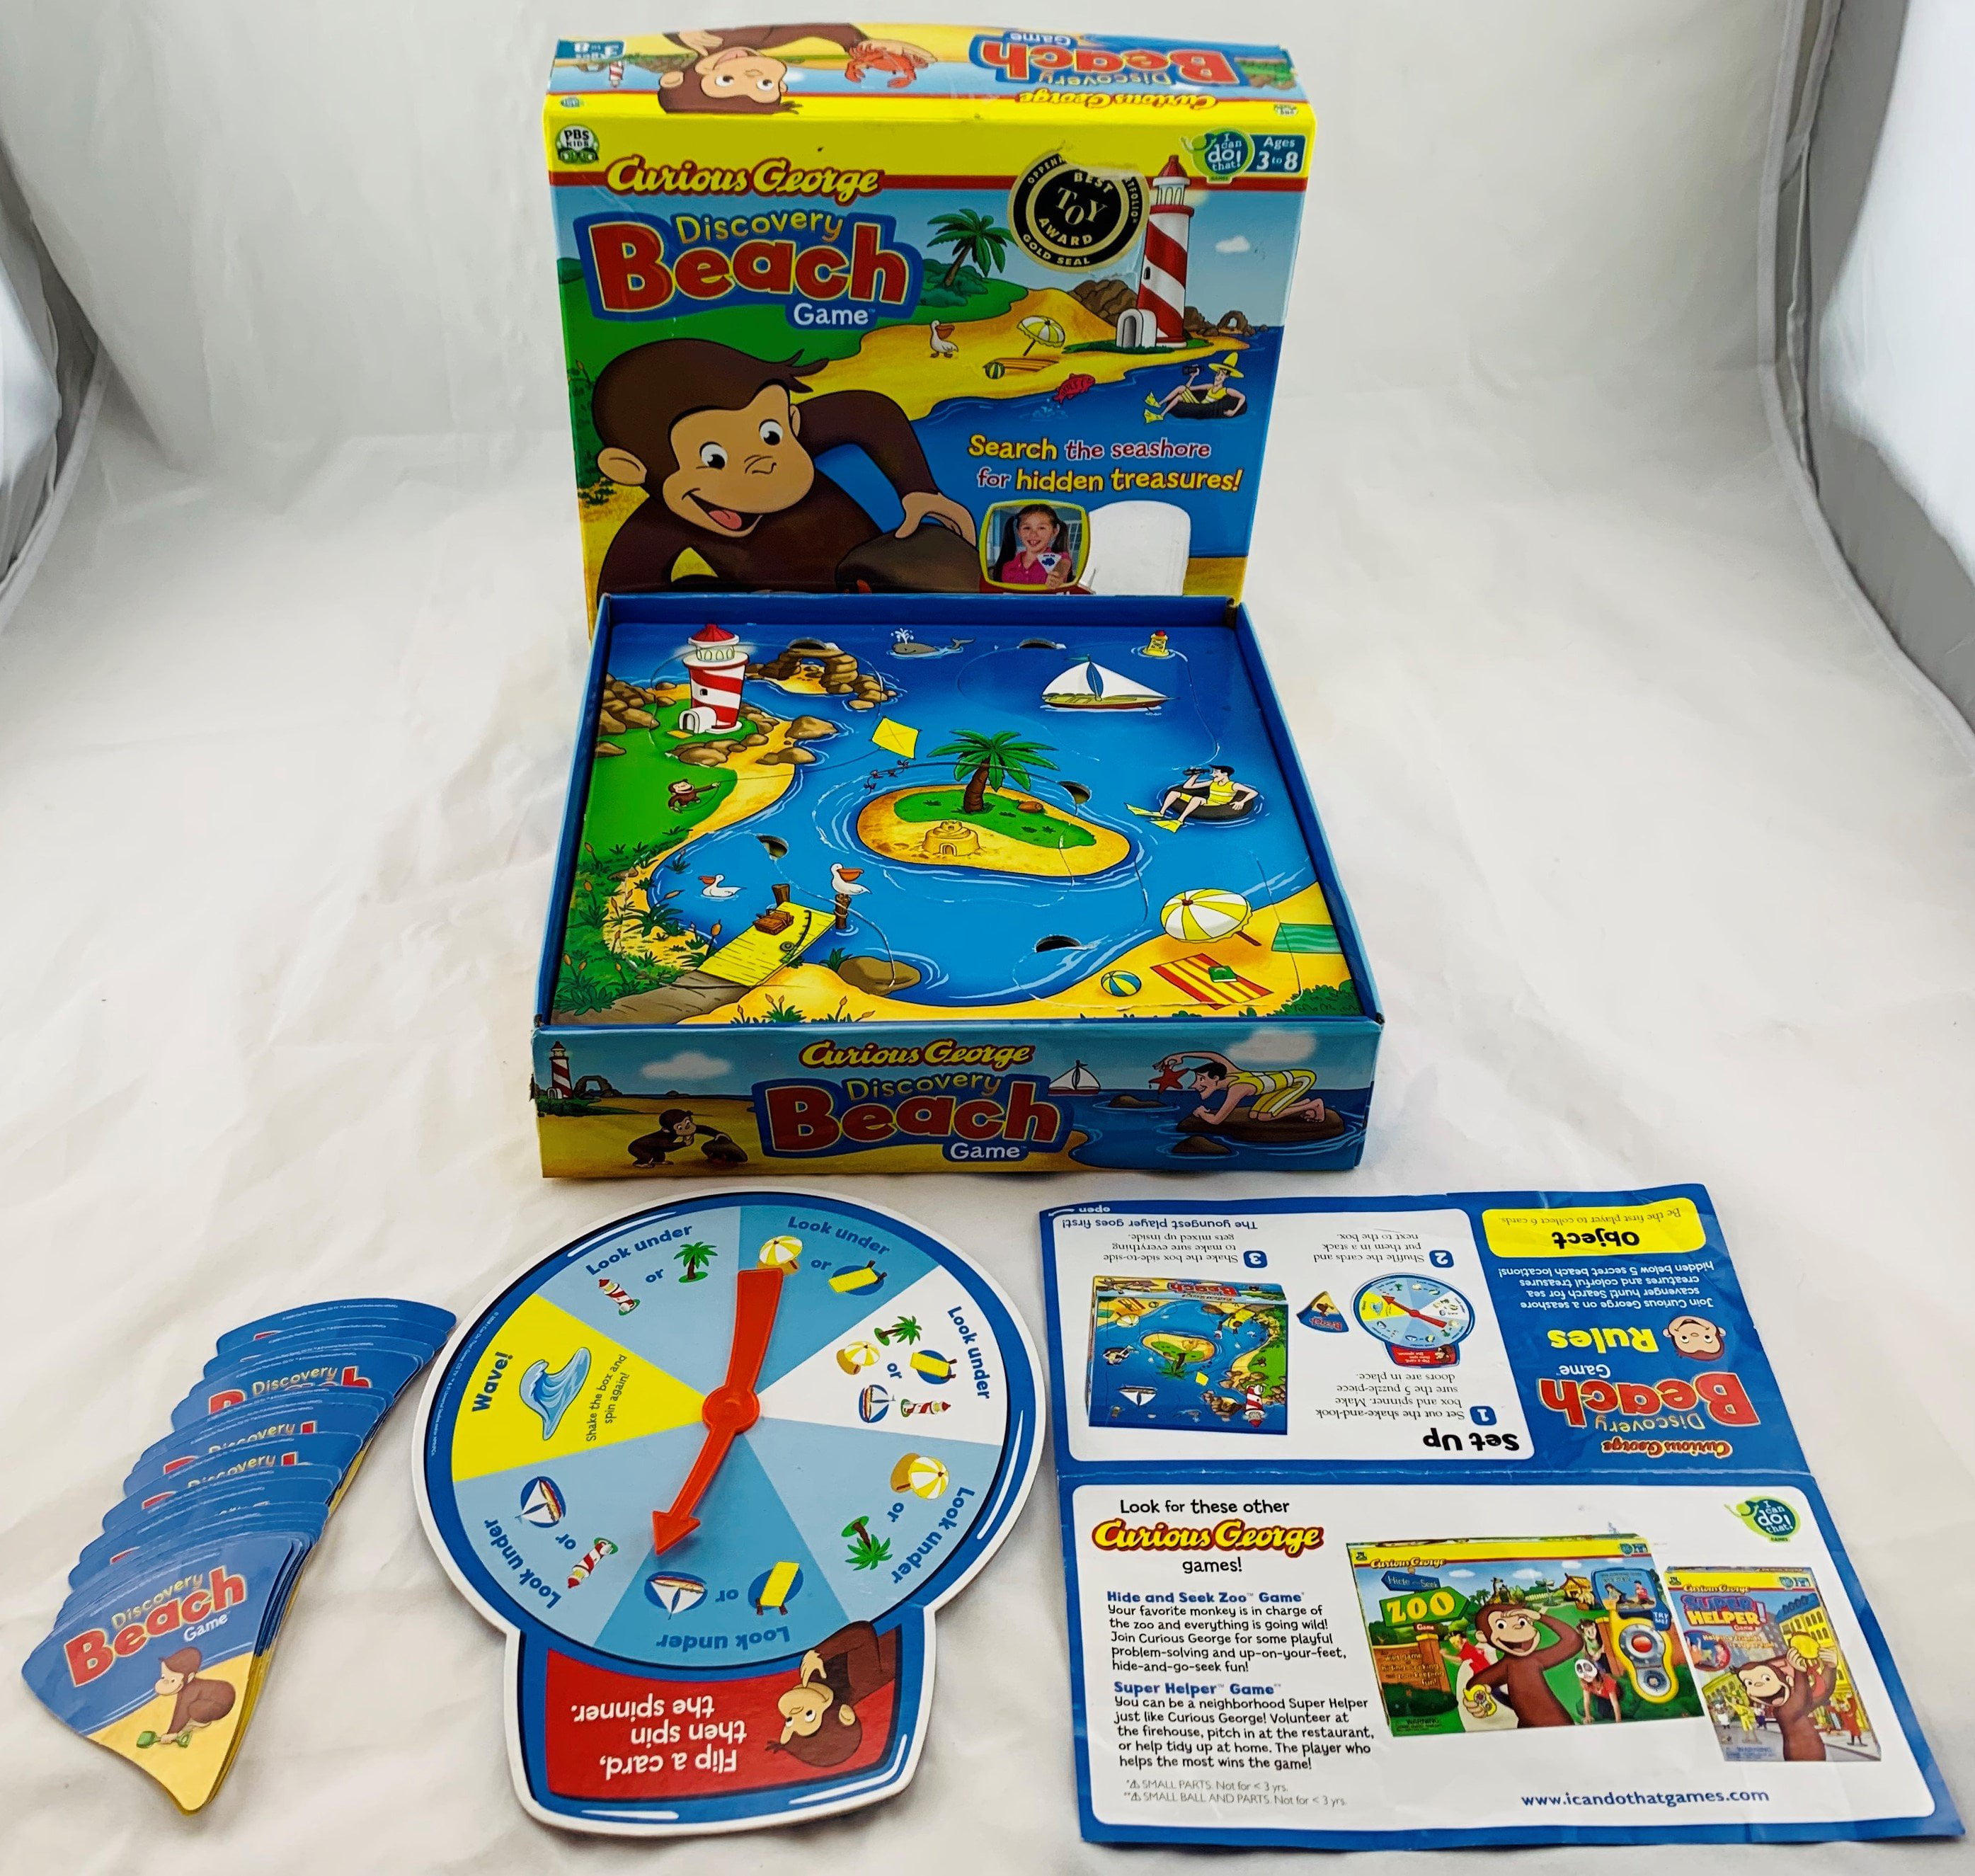 2009 Curious George Discovery Beach Board Game PBS Kids I Can Do That Games for sale online 